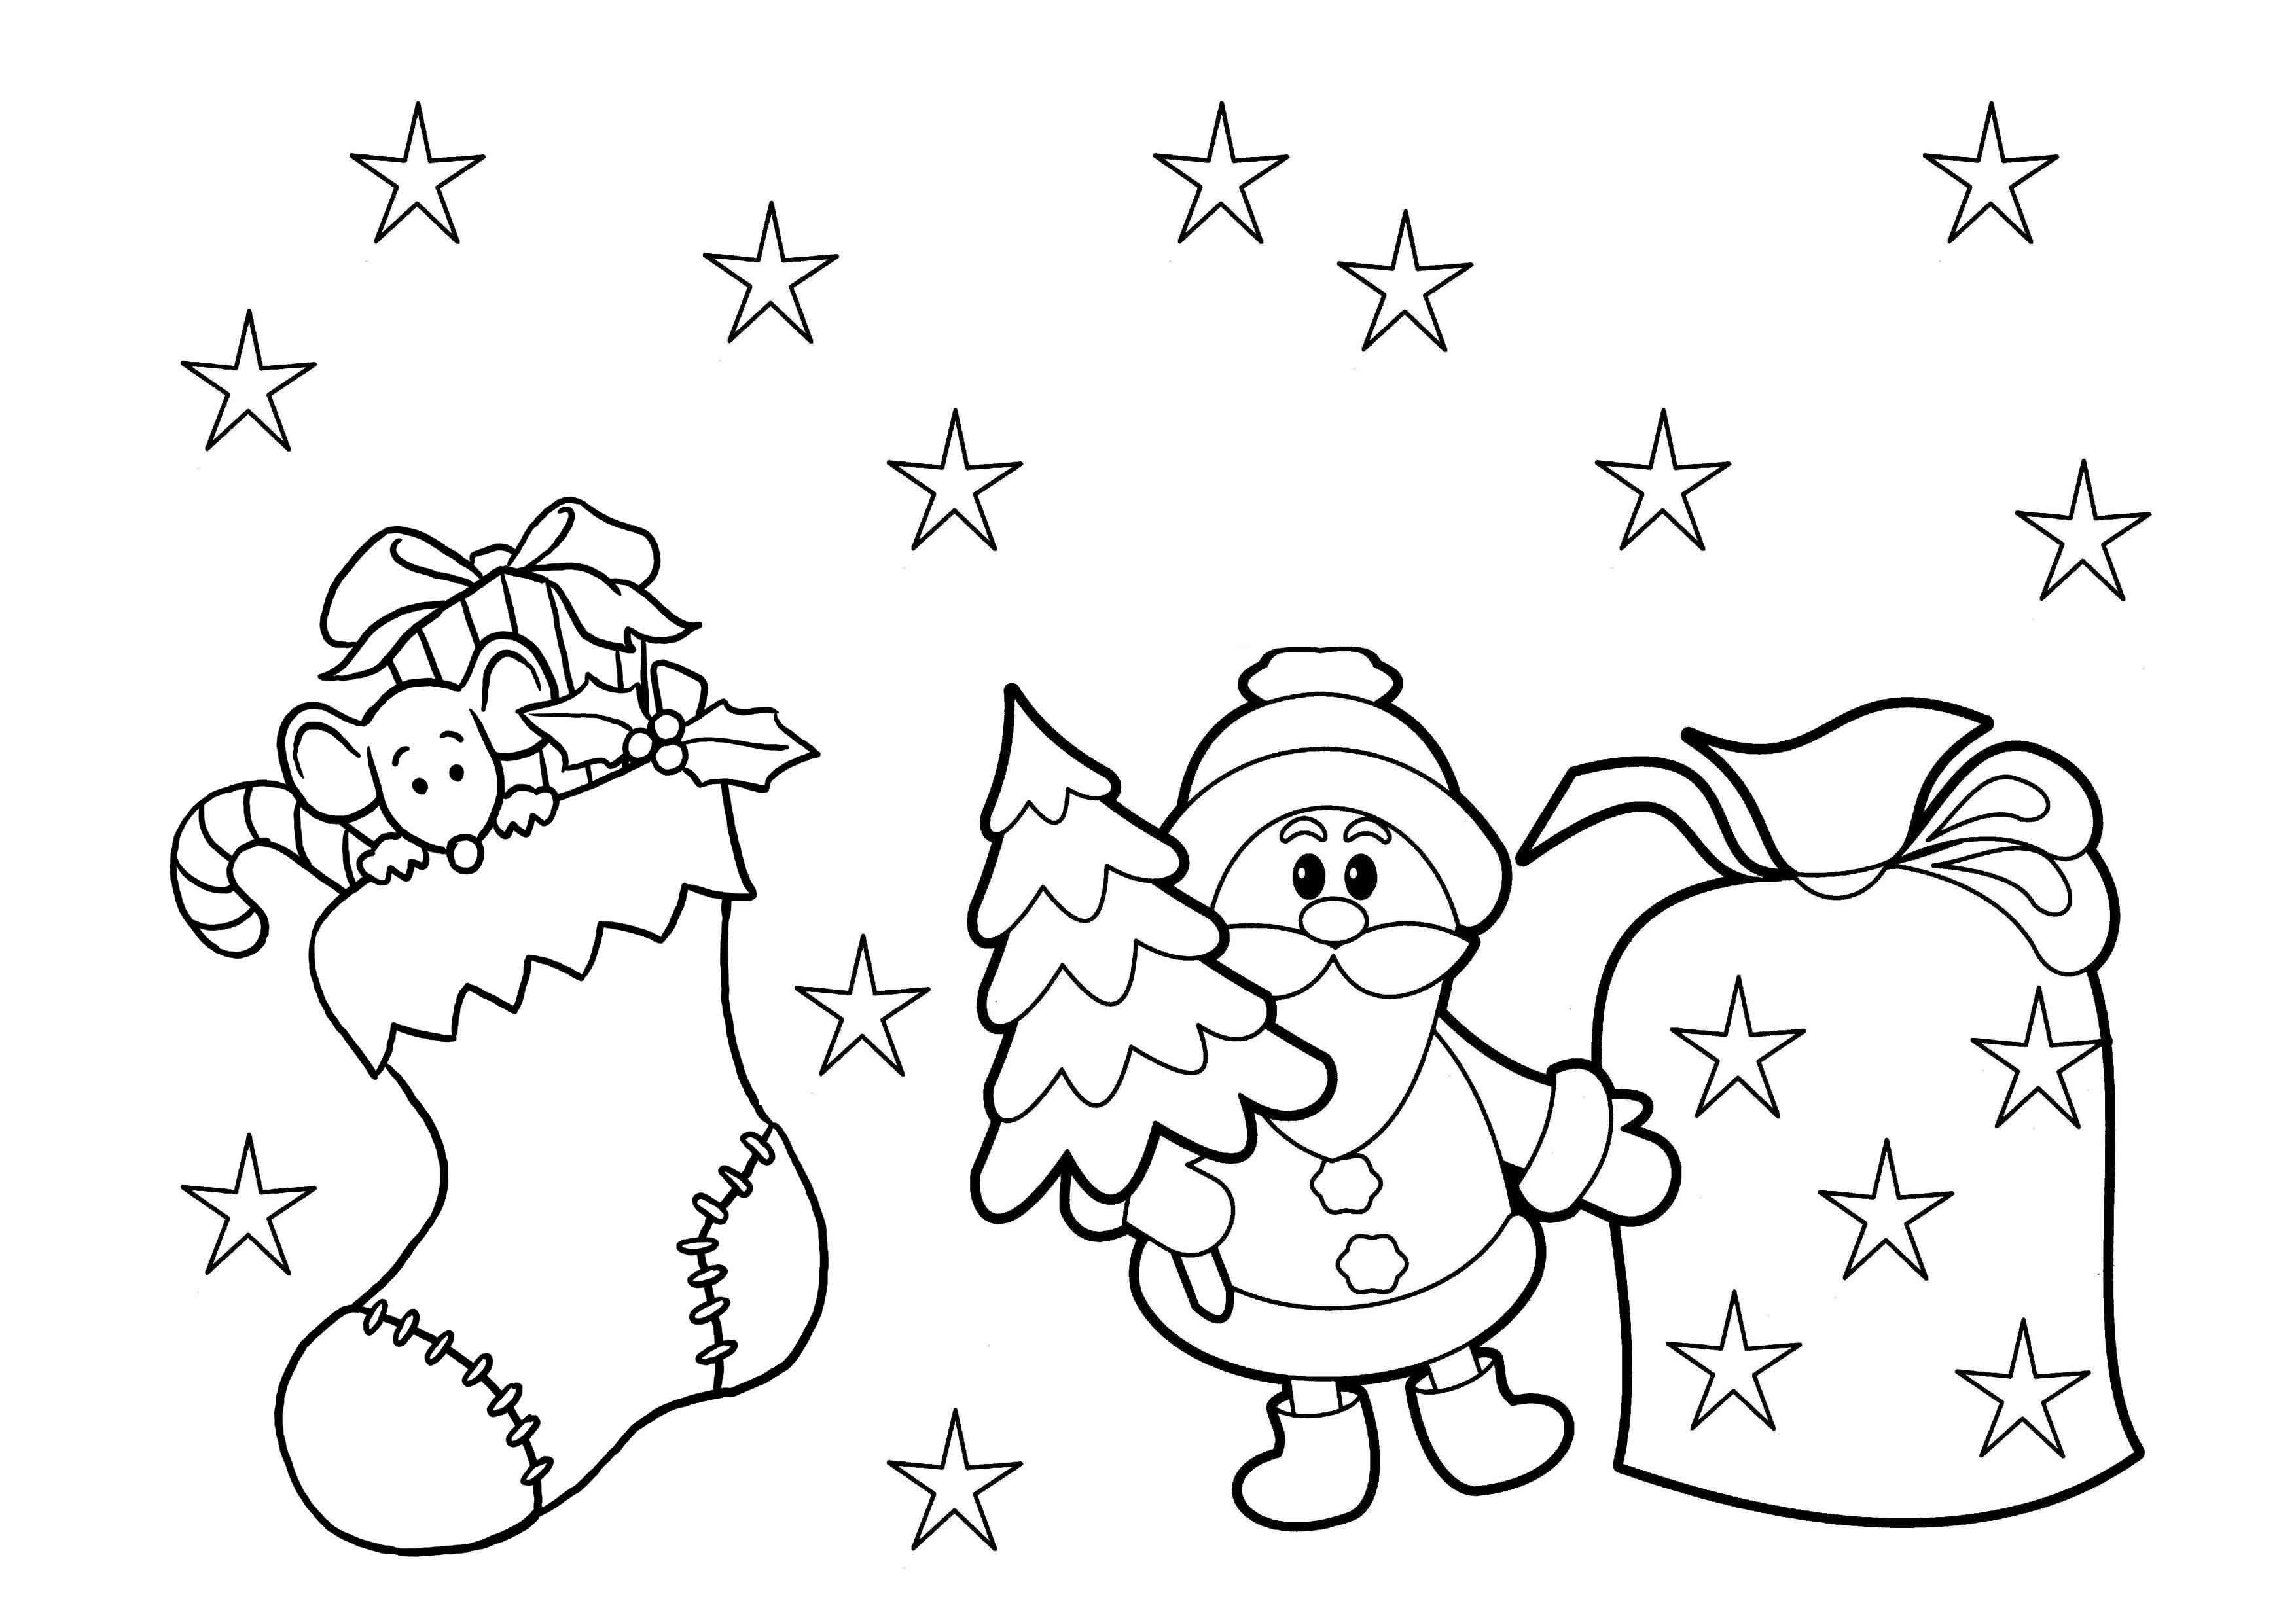 pre-k-coloring-pages-at-getcolorings-free-printable-colorings-pages-to-print-and-color